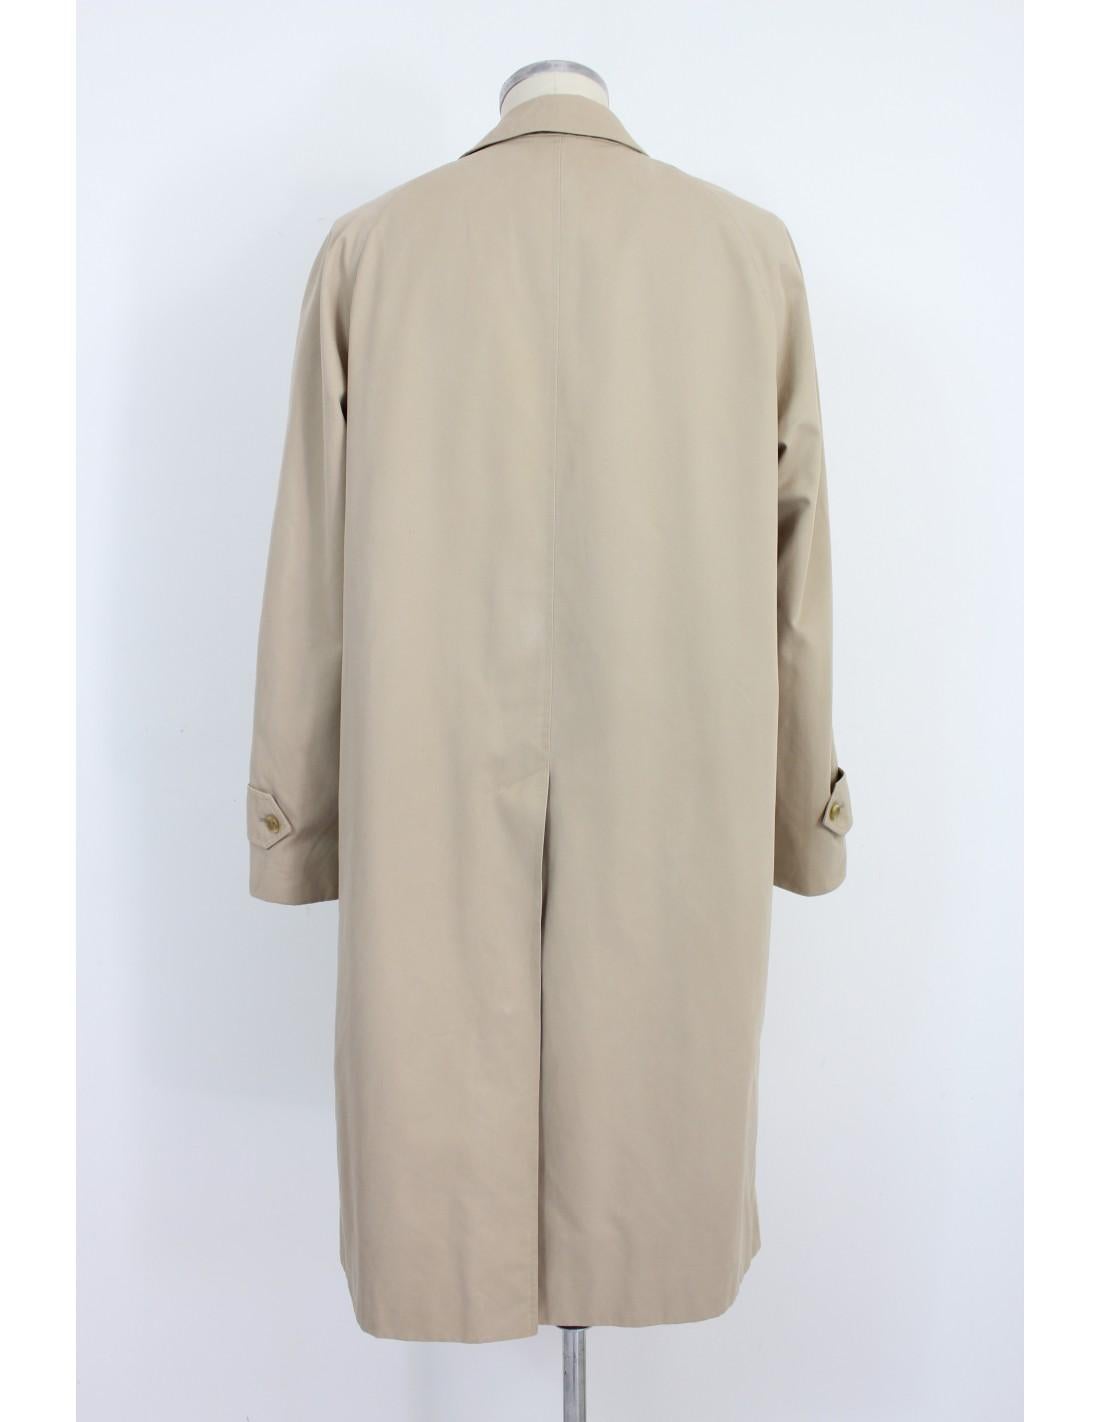 Burberry vintage 80s overcoat. The car coat par excellence is the one signed by Burberry, Pimlico heritage model. Beige color in 51% cotton 49% polyester classic gabardine fabric. The inner lining is made with the unmistakable Burberry texture,